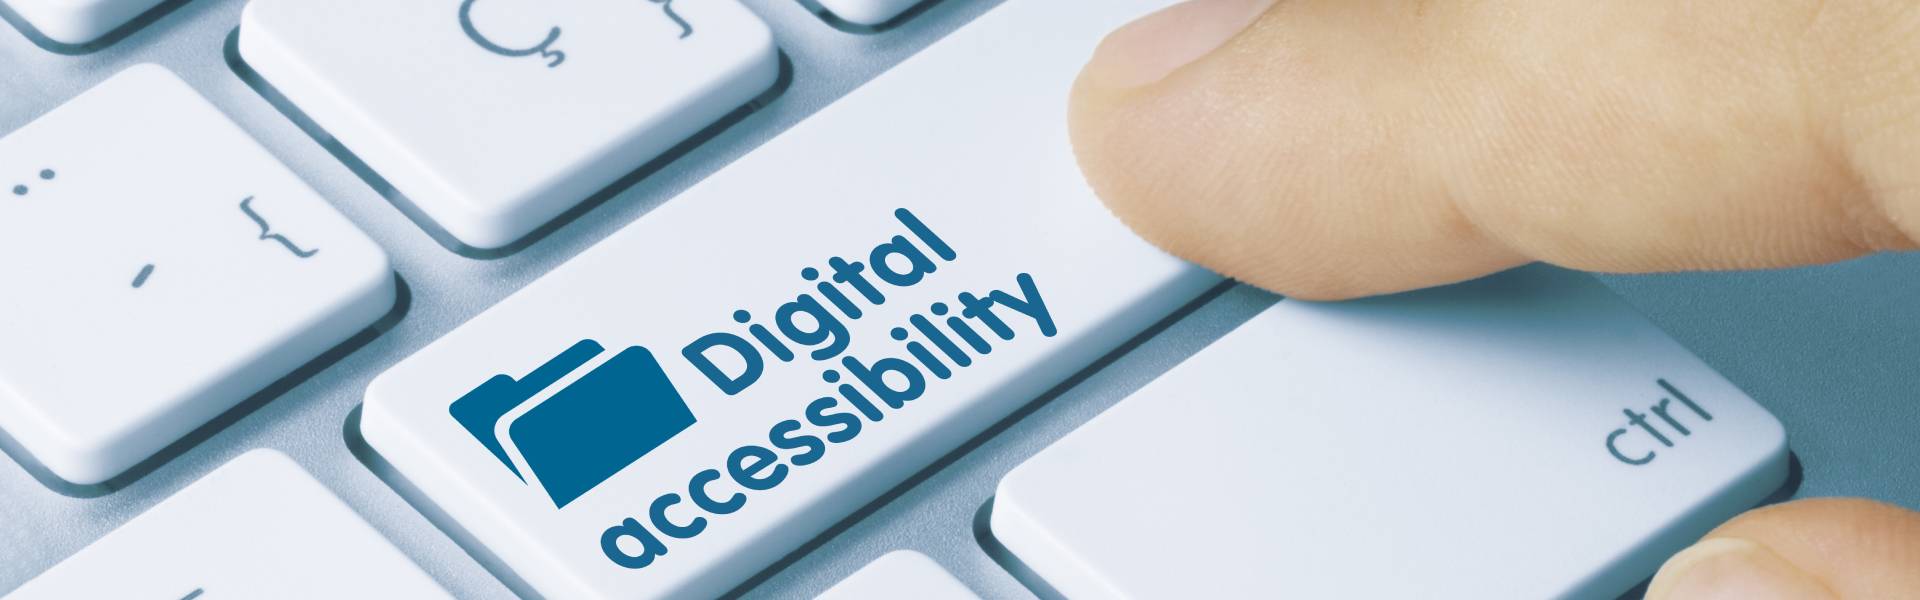 Fingure pressing digital accessibility button on the keyboard